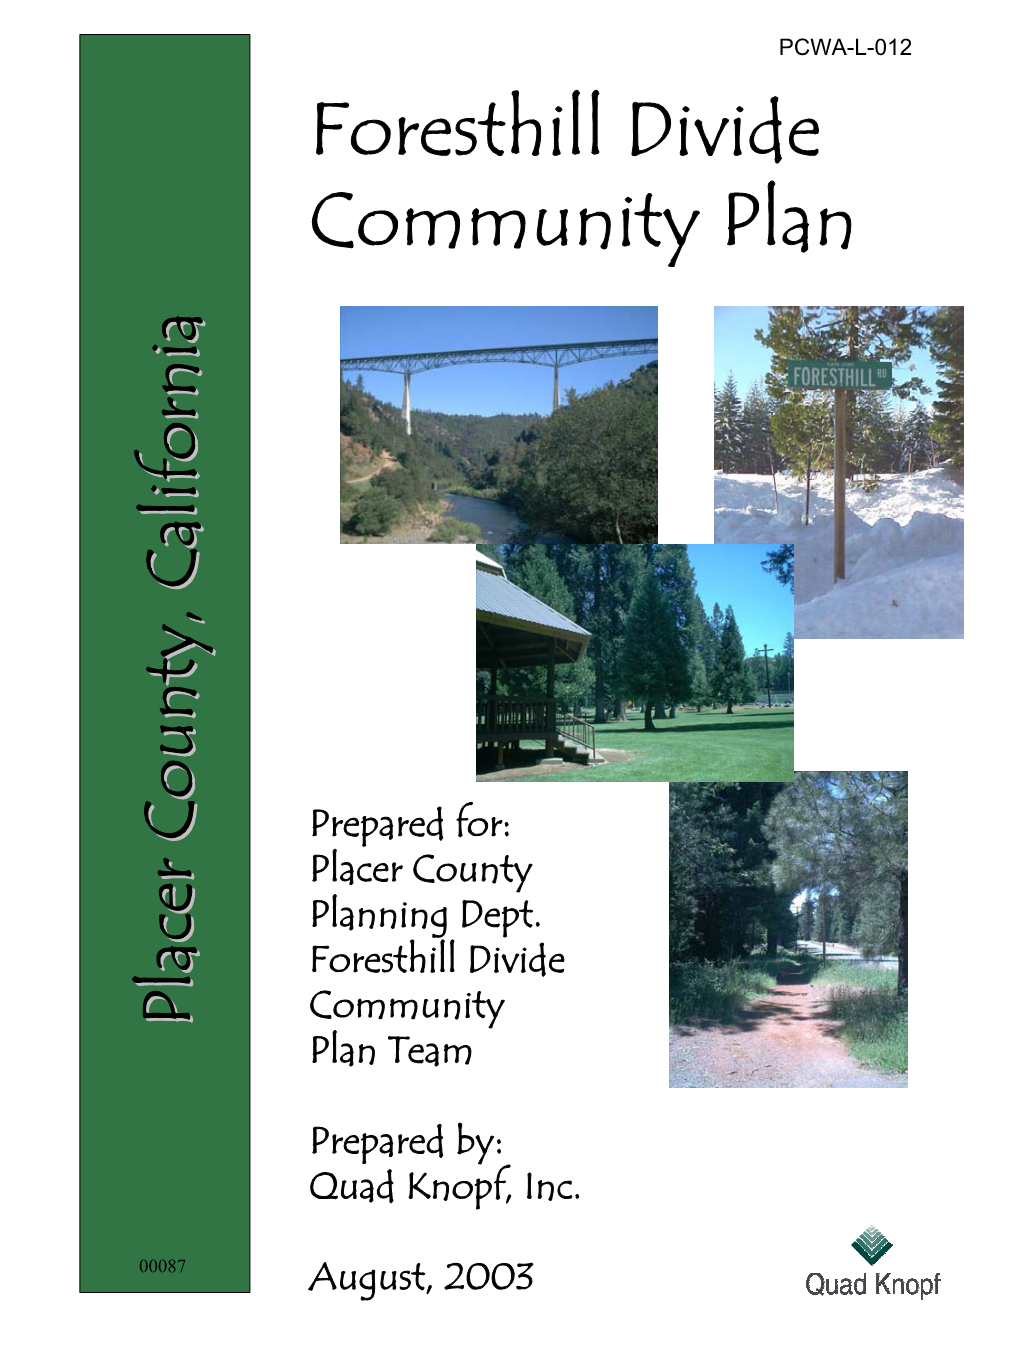 Foresthill Divide Community Plan